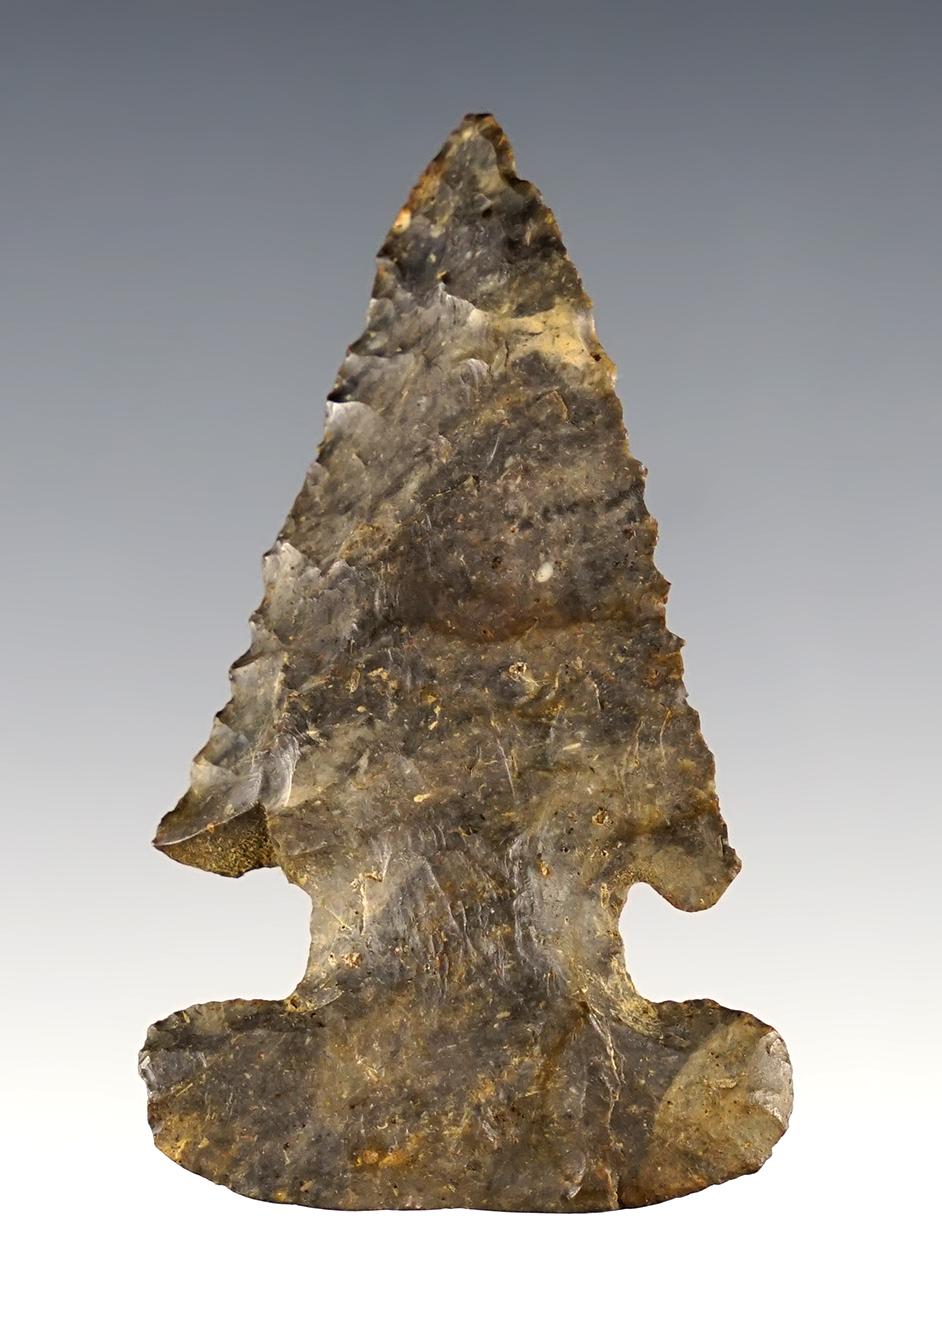 Heavily patinated 2 3/8" Ohio Thebes made from Coshocton Flint.